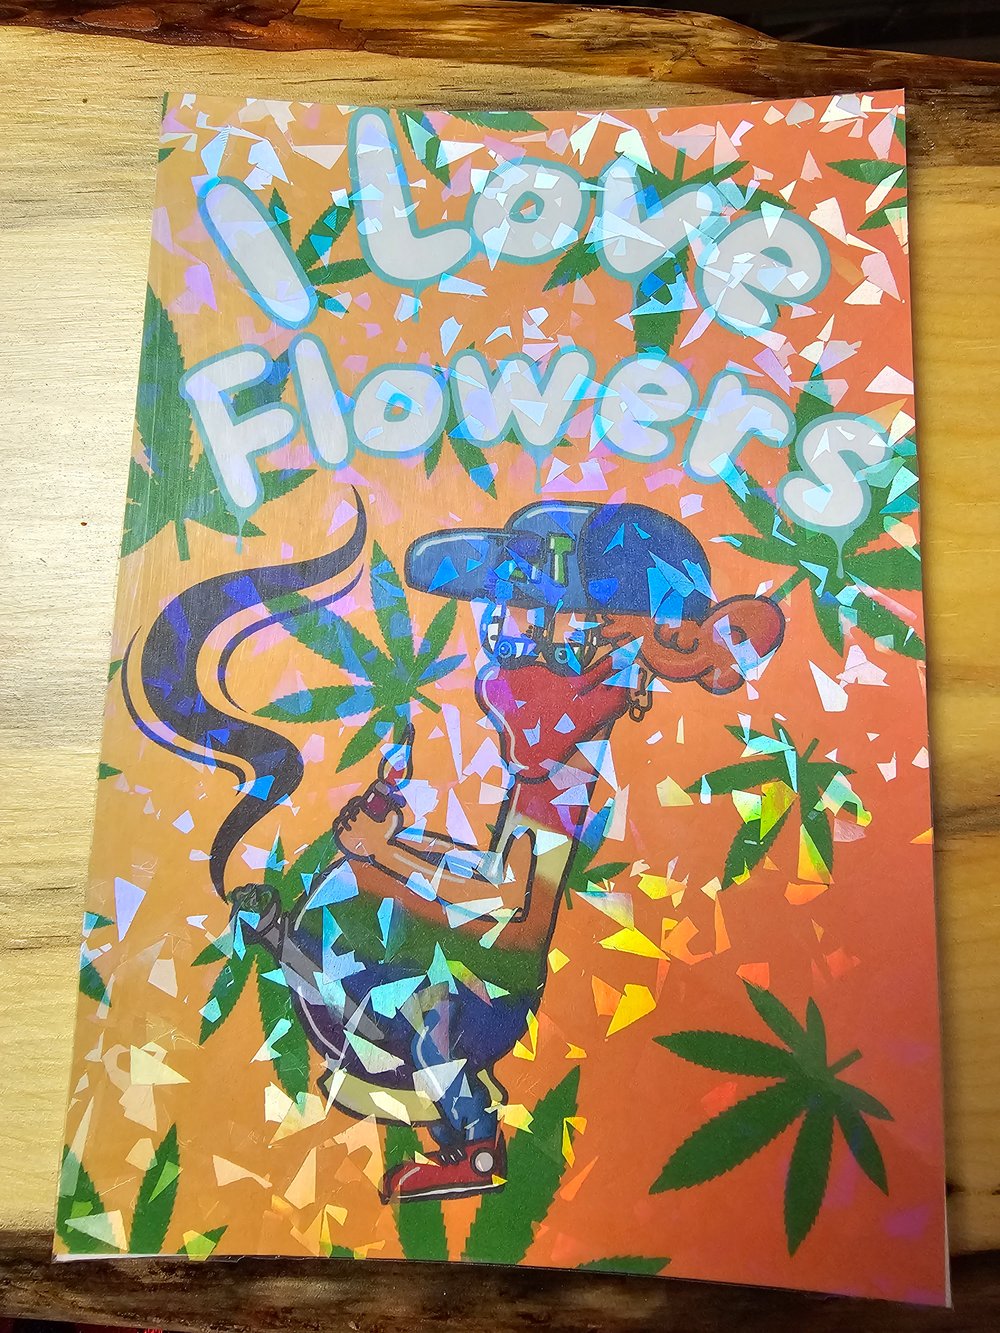 Image of "I Love Flowers" Post Card